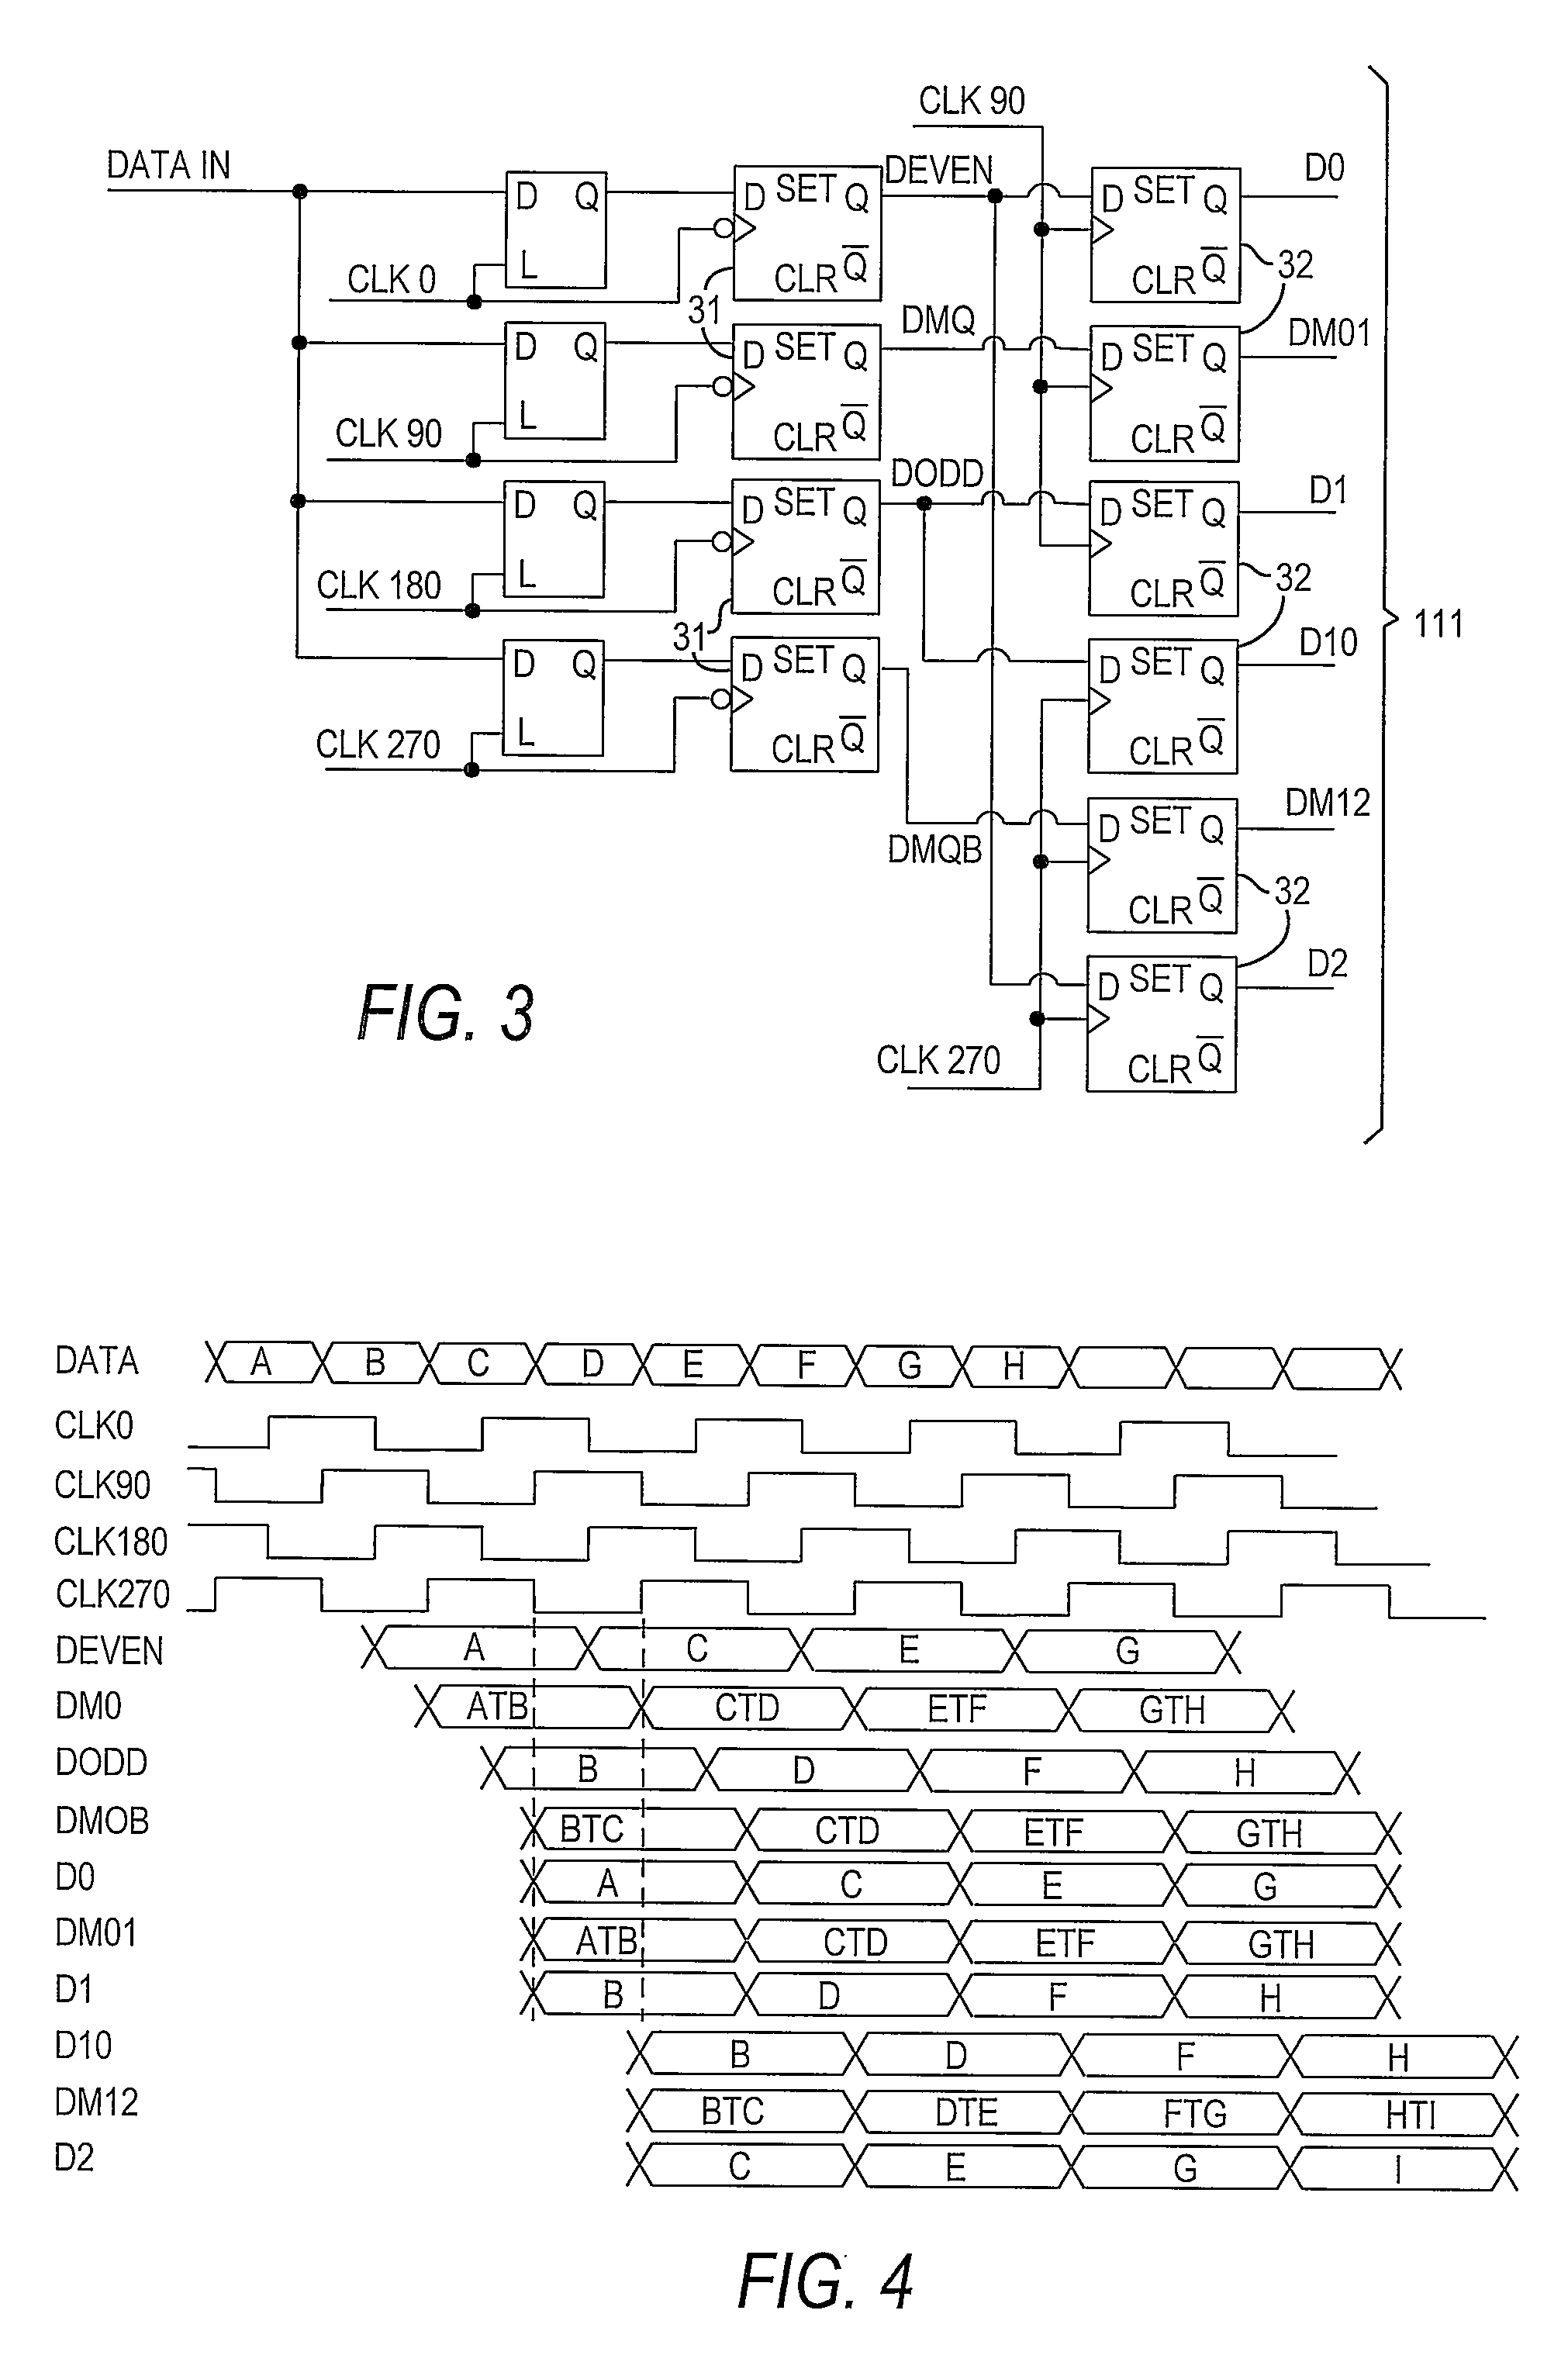 Protocol-agnostic automatic rate negotiation for high-speed serial interface in a programmable logic device